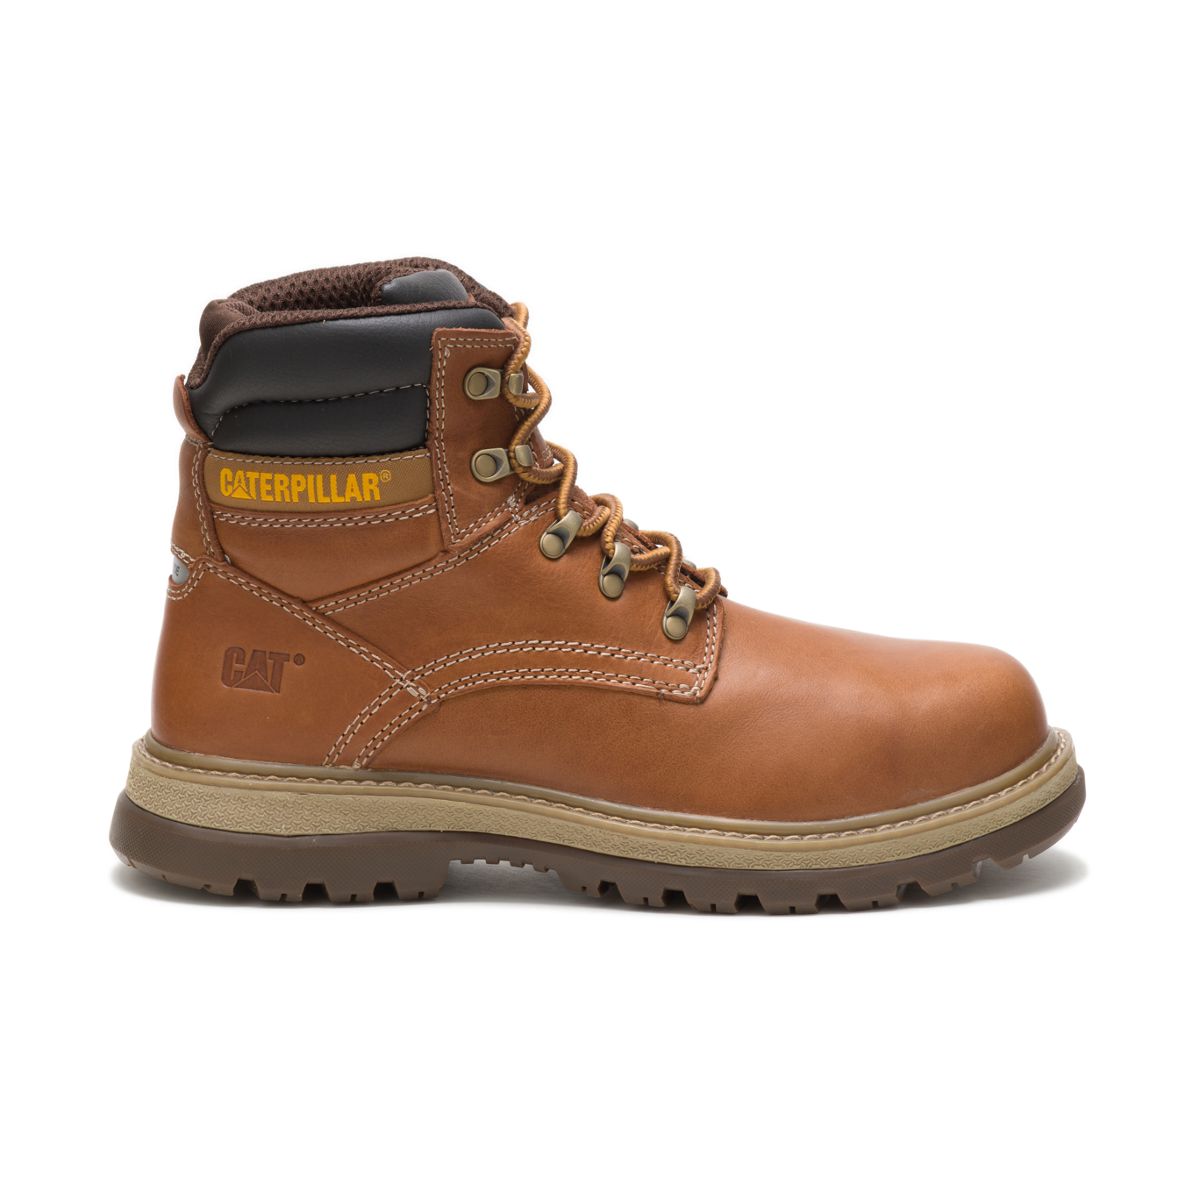 Caterpillar Boots \u0026 Shoes On Sale 